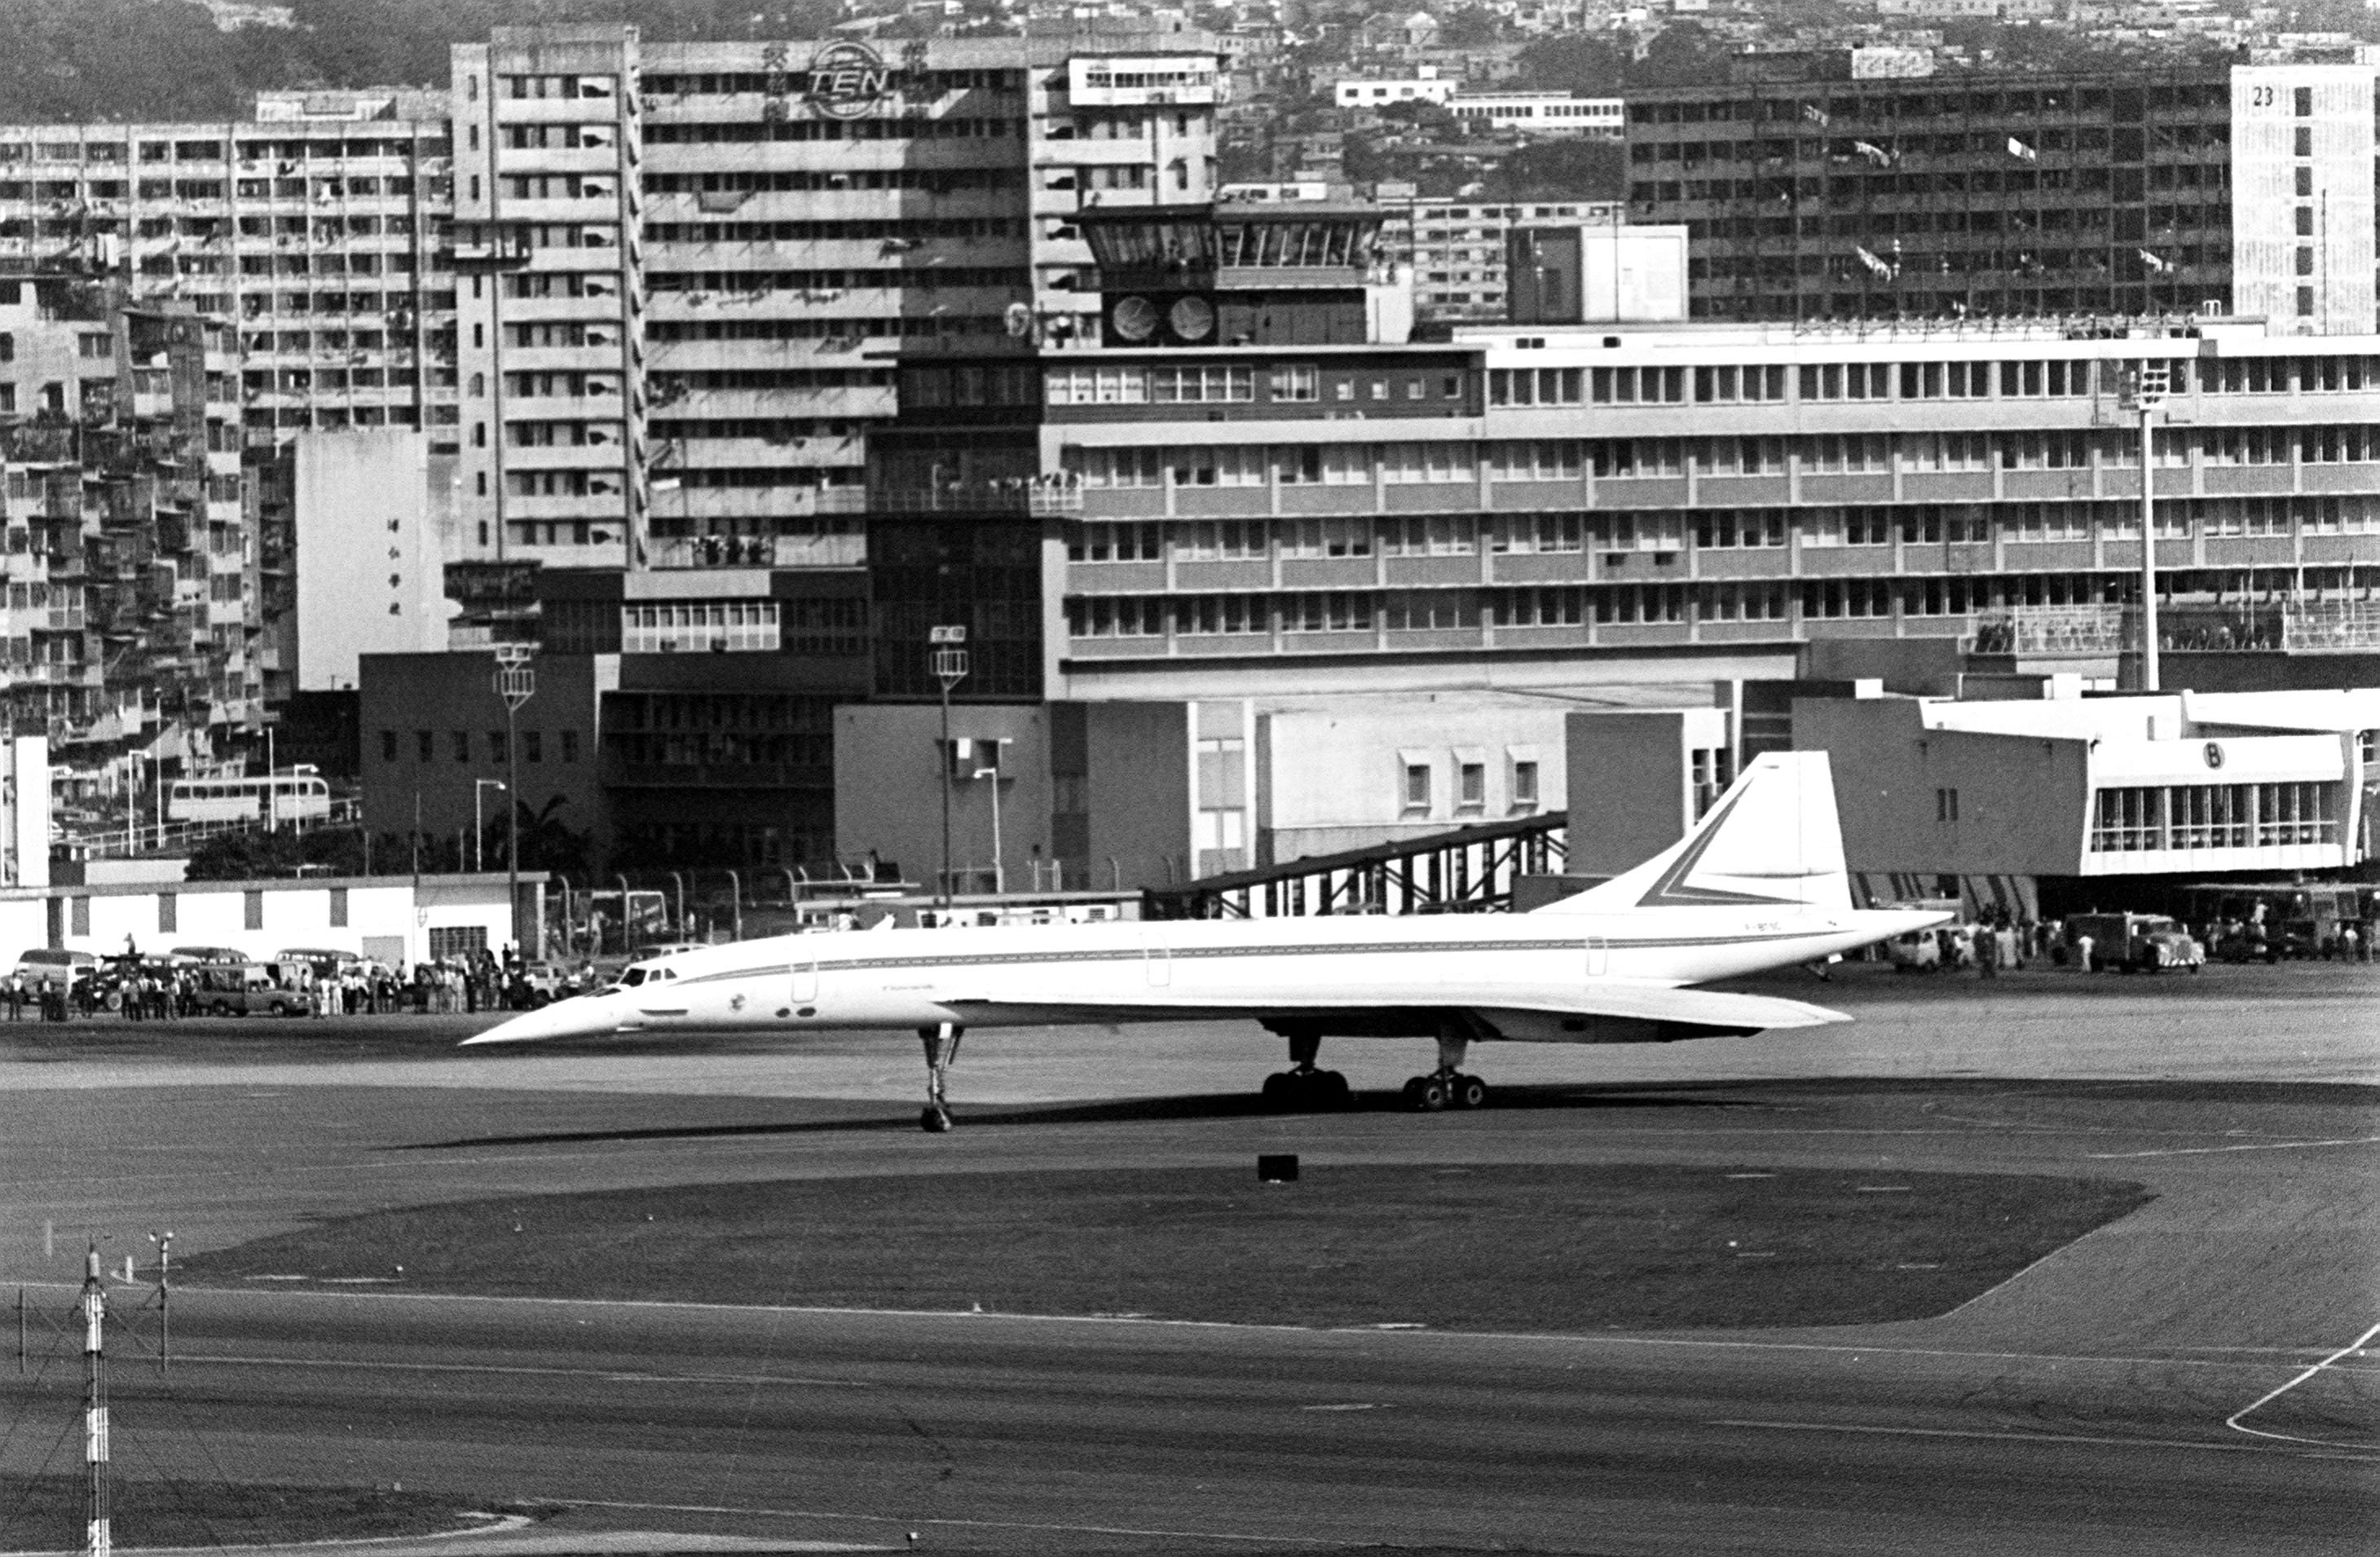 The supersonic airliner that would later crash in Paris, ending the Concorde era, arrived in Hong Kong 41 years ago with, among its passengers, a certain Mrs Marcos on a shopping trip from Manila